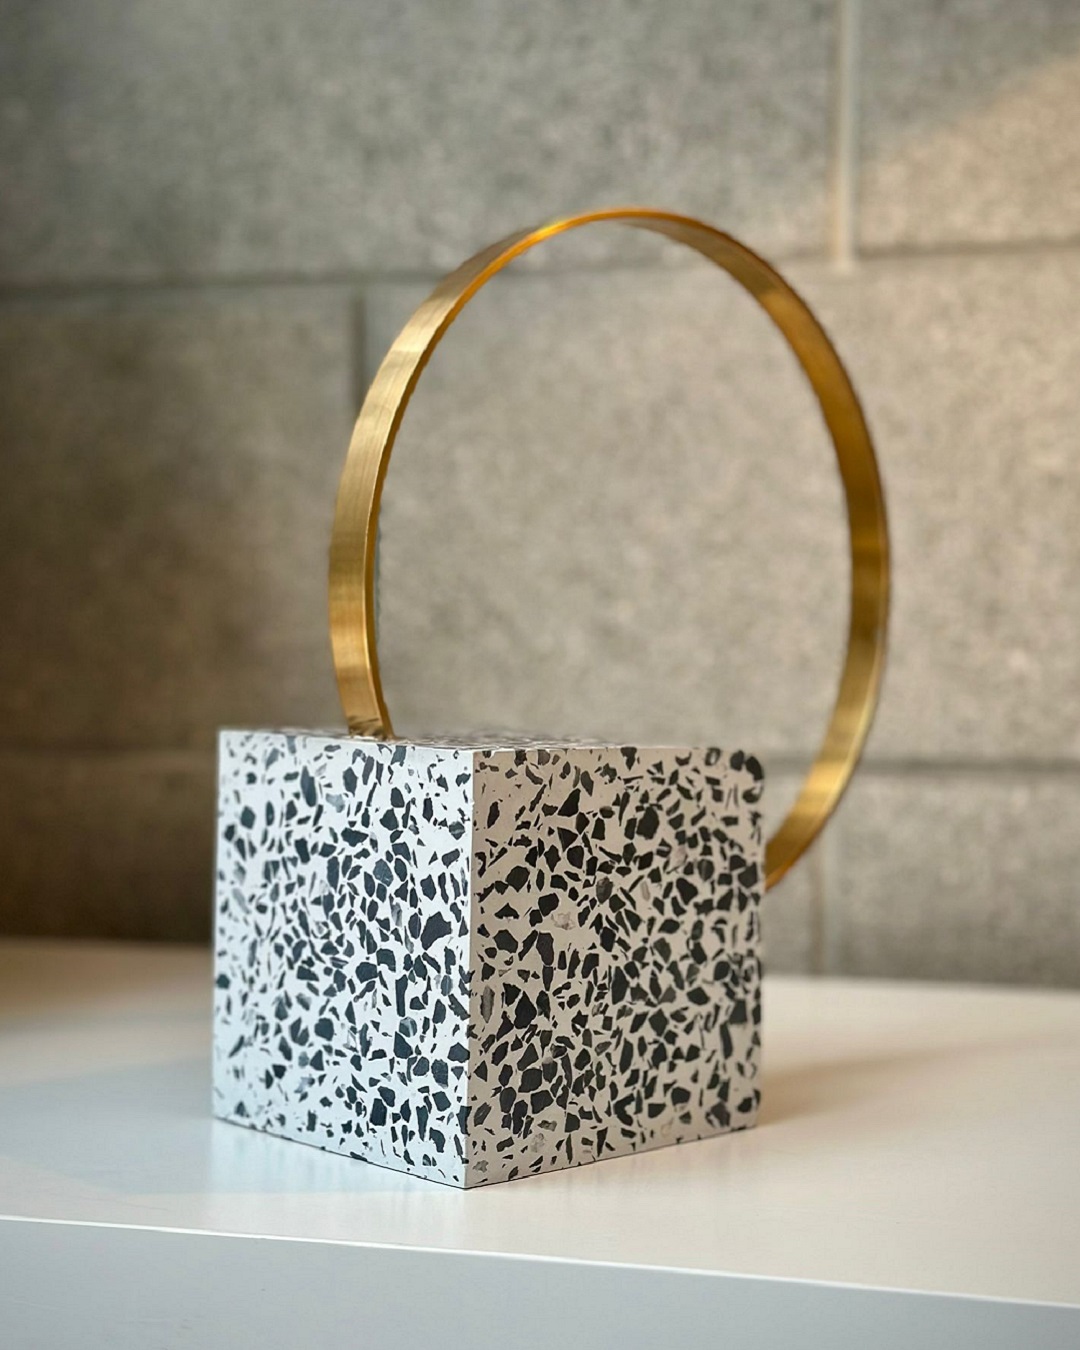 Speckled square bookend with brass loop on shelf